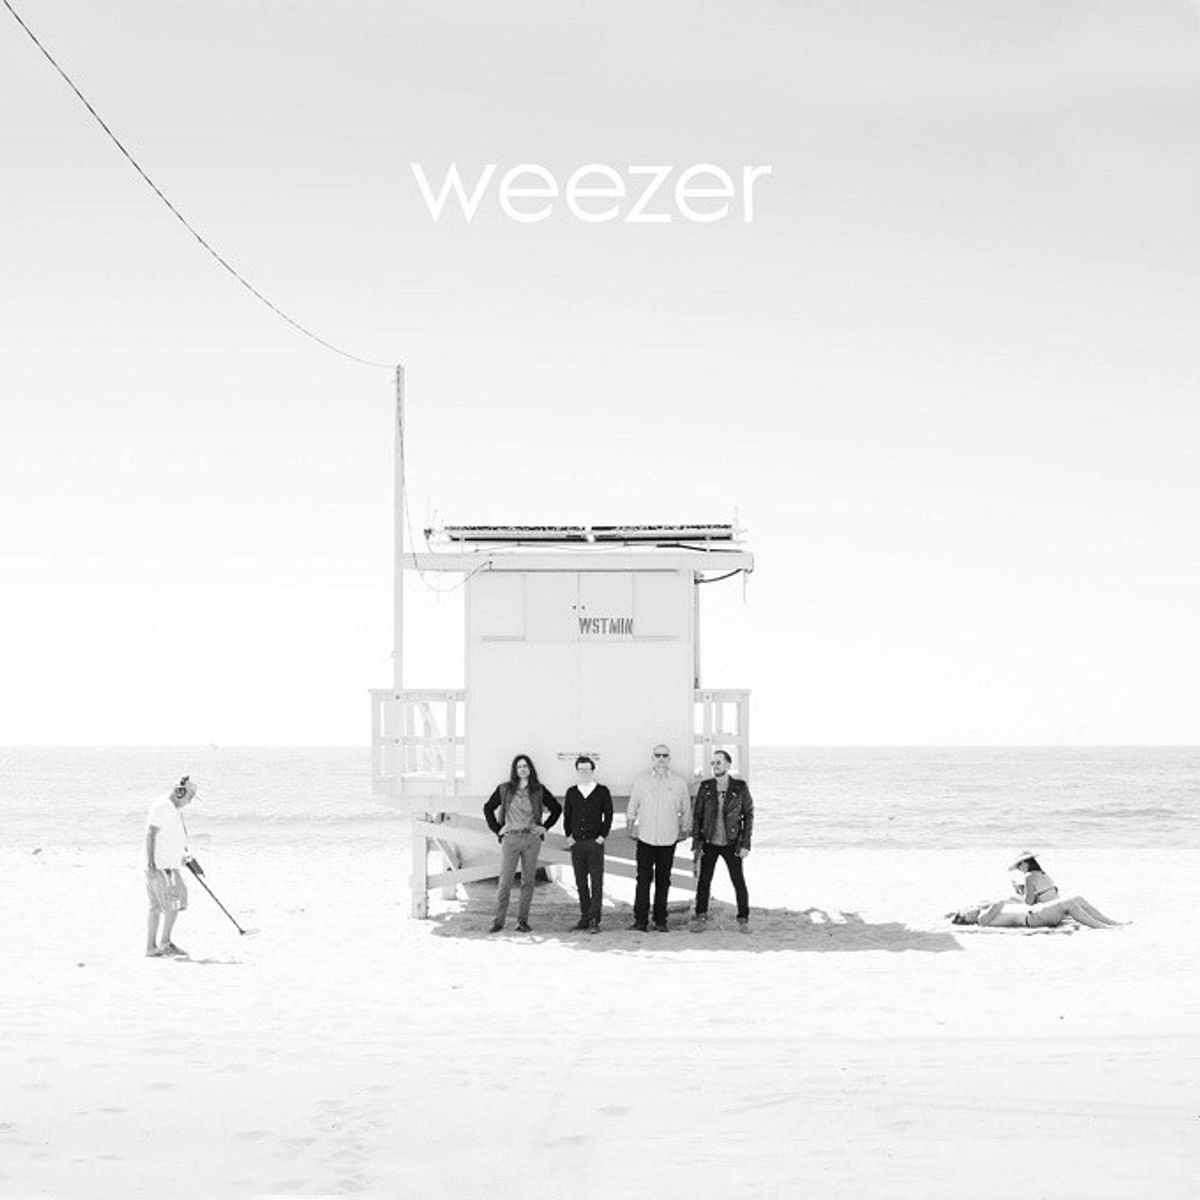 Weezer (White Album) by Weezer: A Savage Review